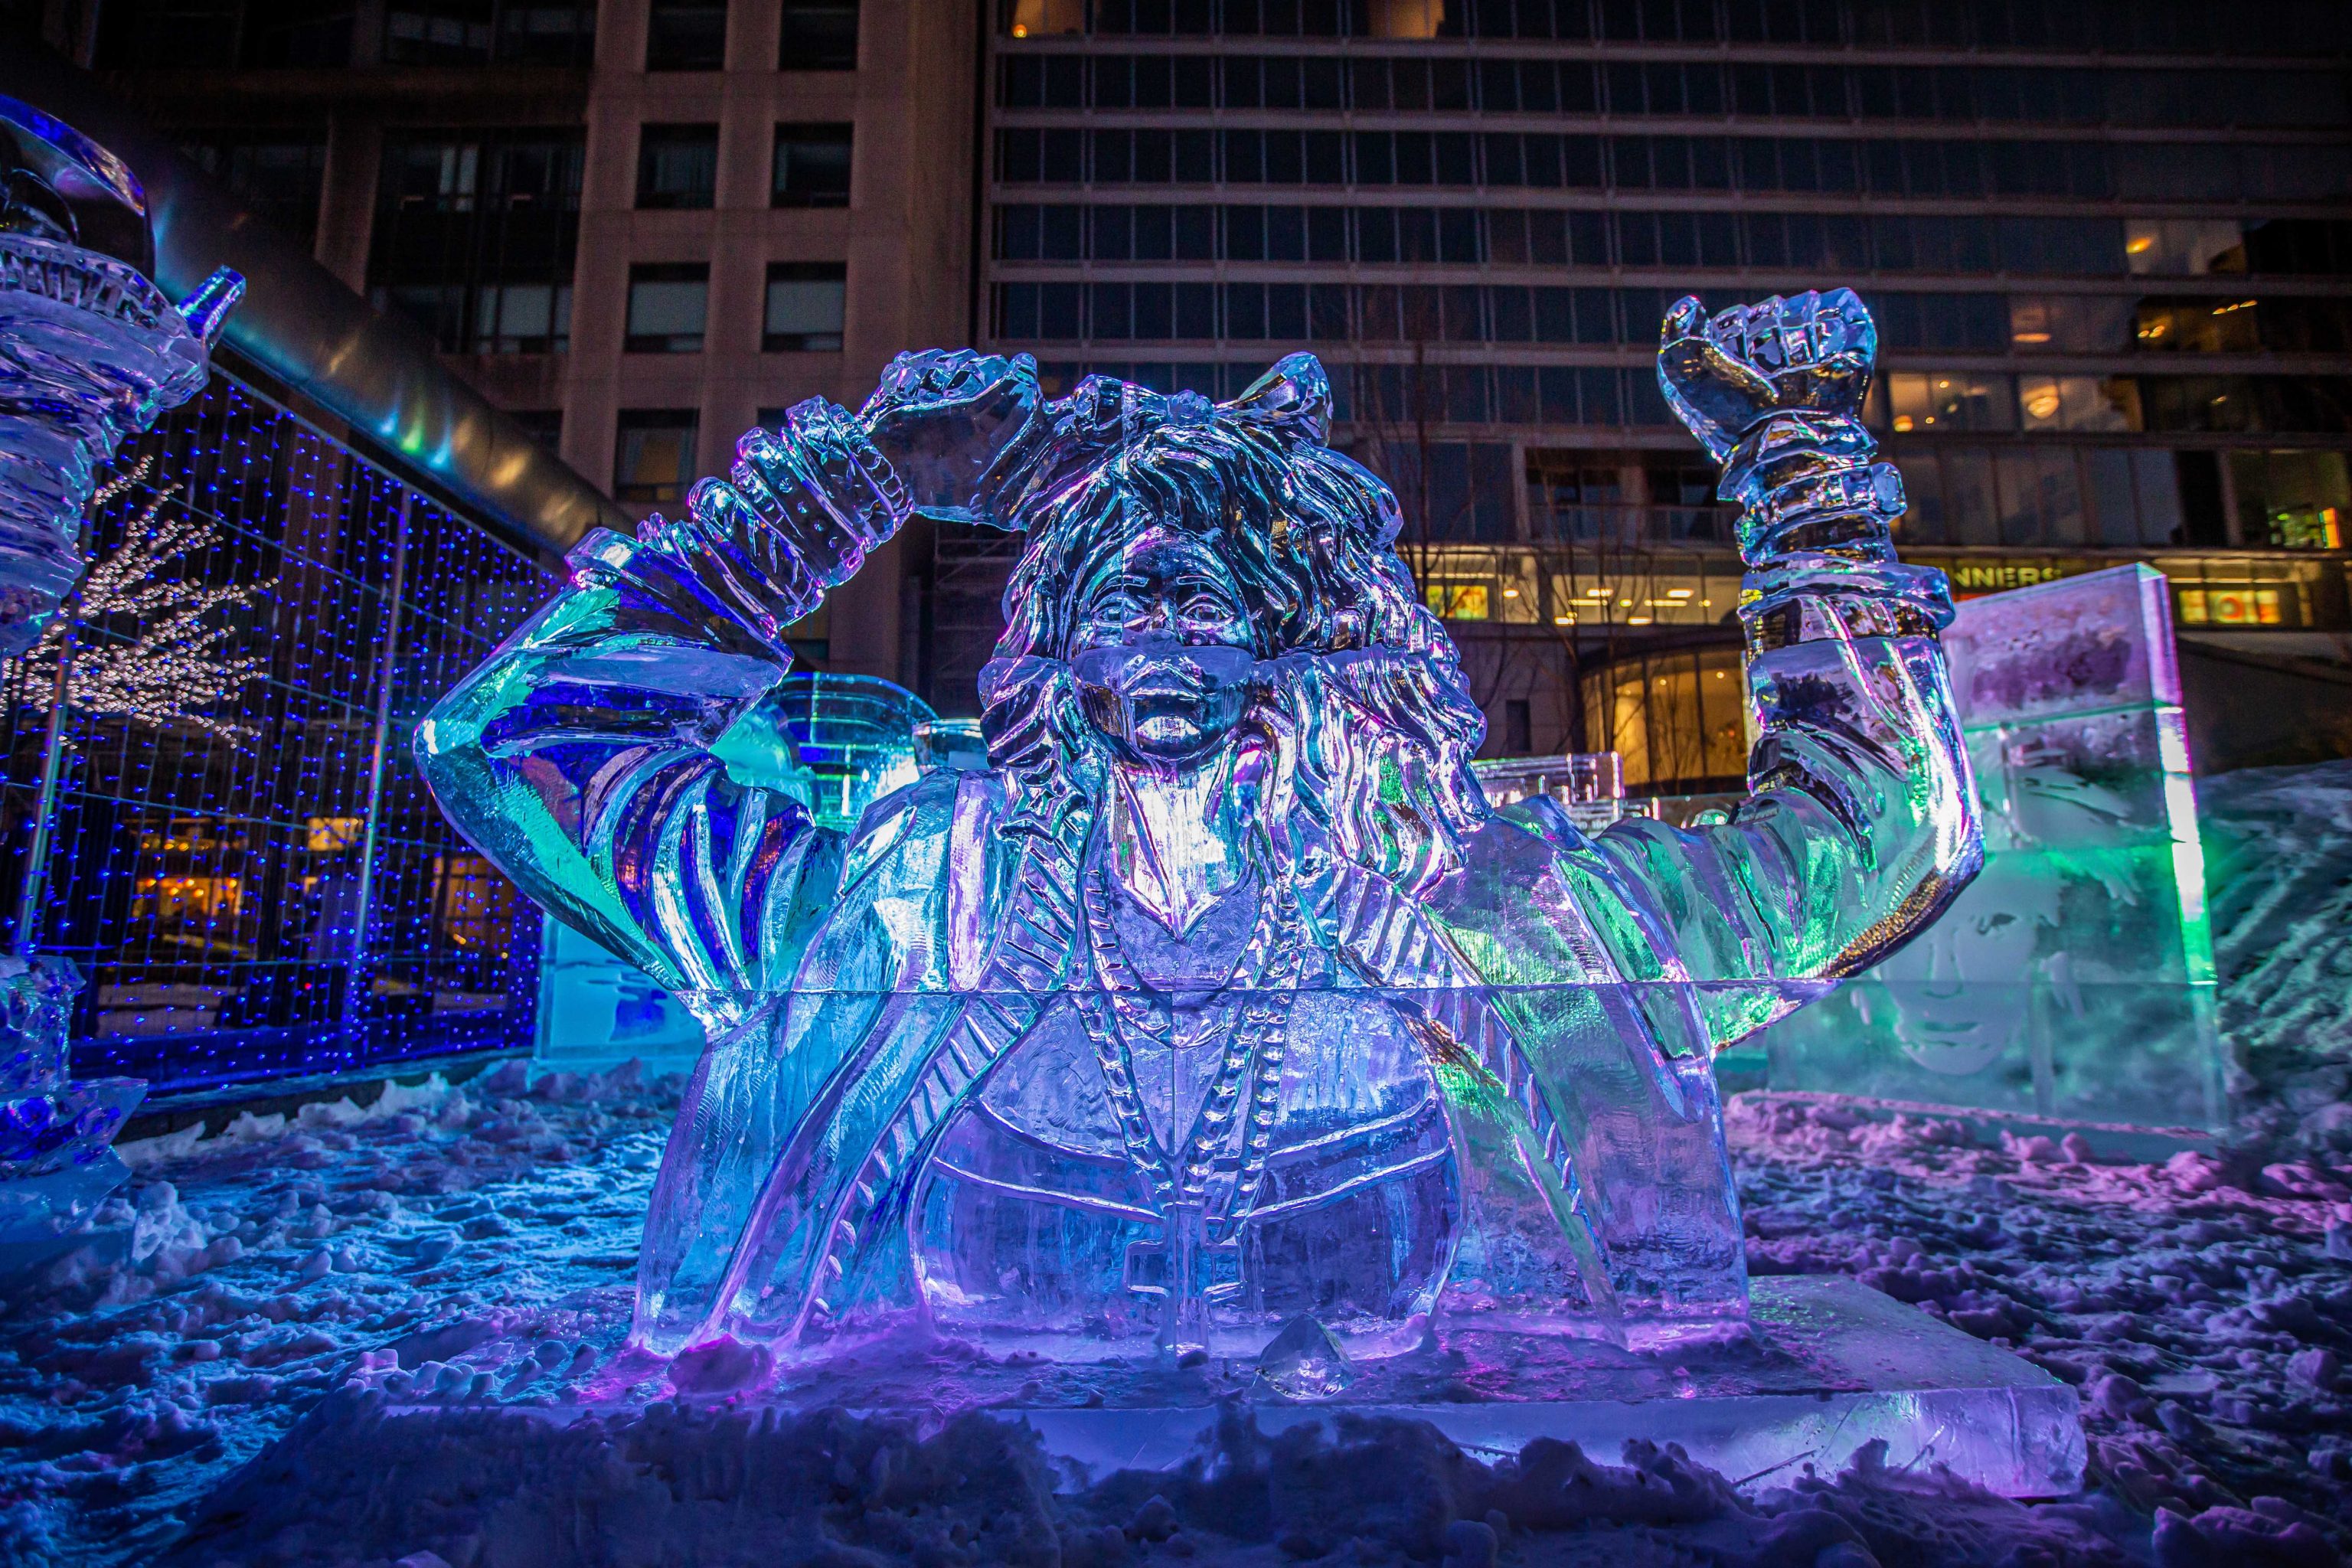 Take A Trip Around The World with The Annual BloorYorkville Ice Fest